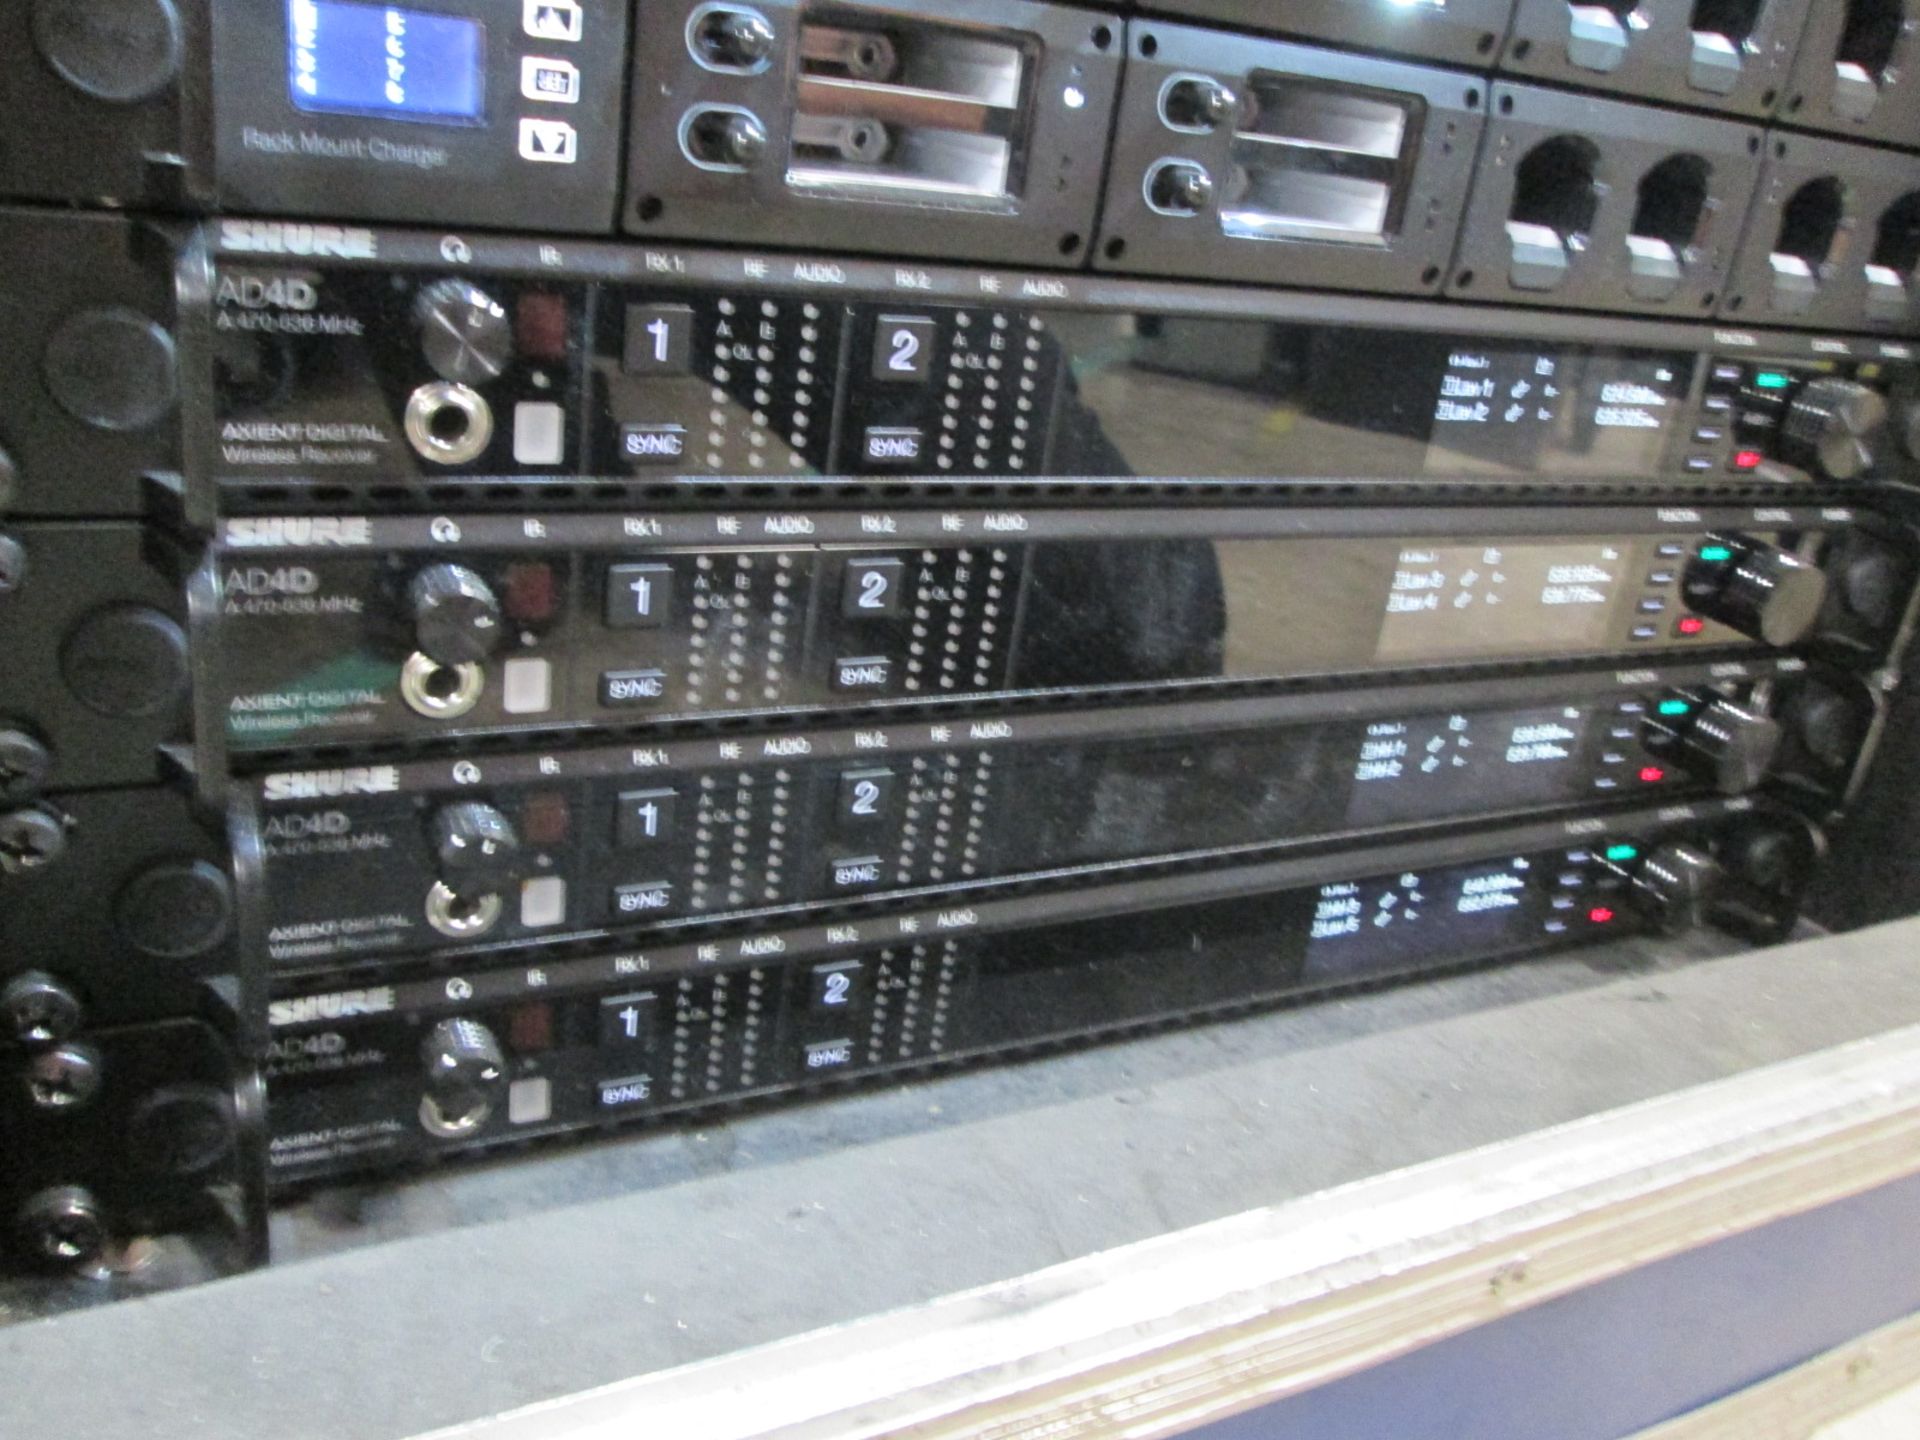 Shure Axiant Digital Radio Rack. To include 4 x AD4D 2 channel digital receivers (470.636 MHz), 4 - Image 3 of 13